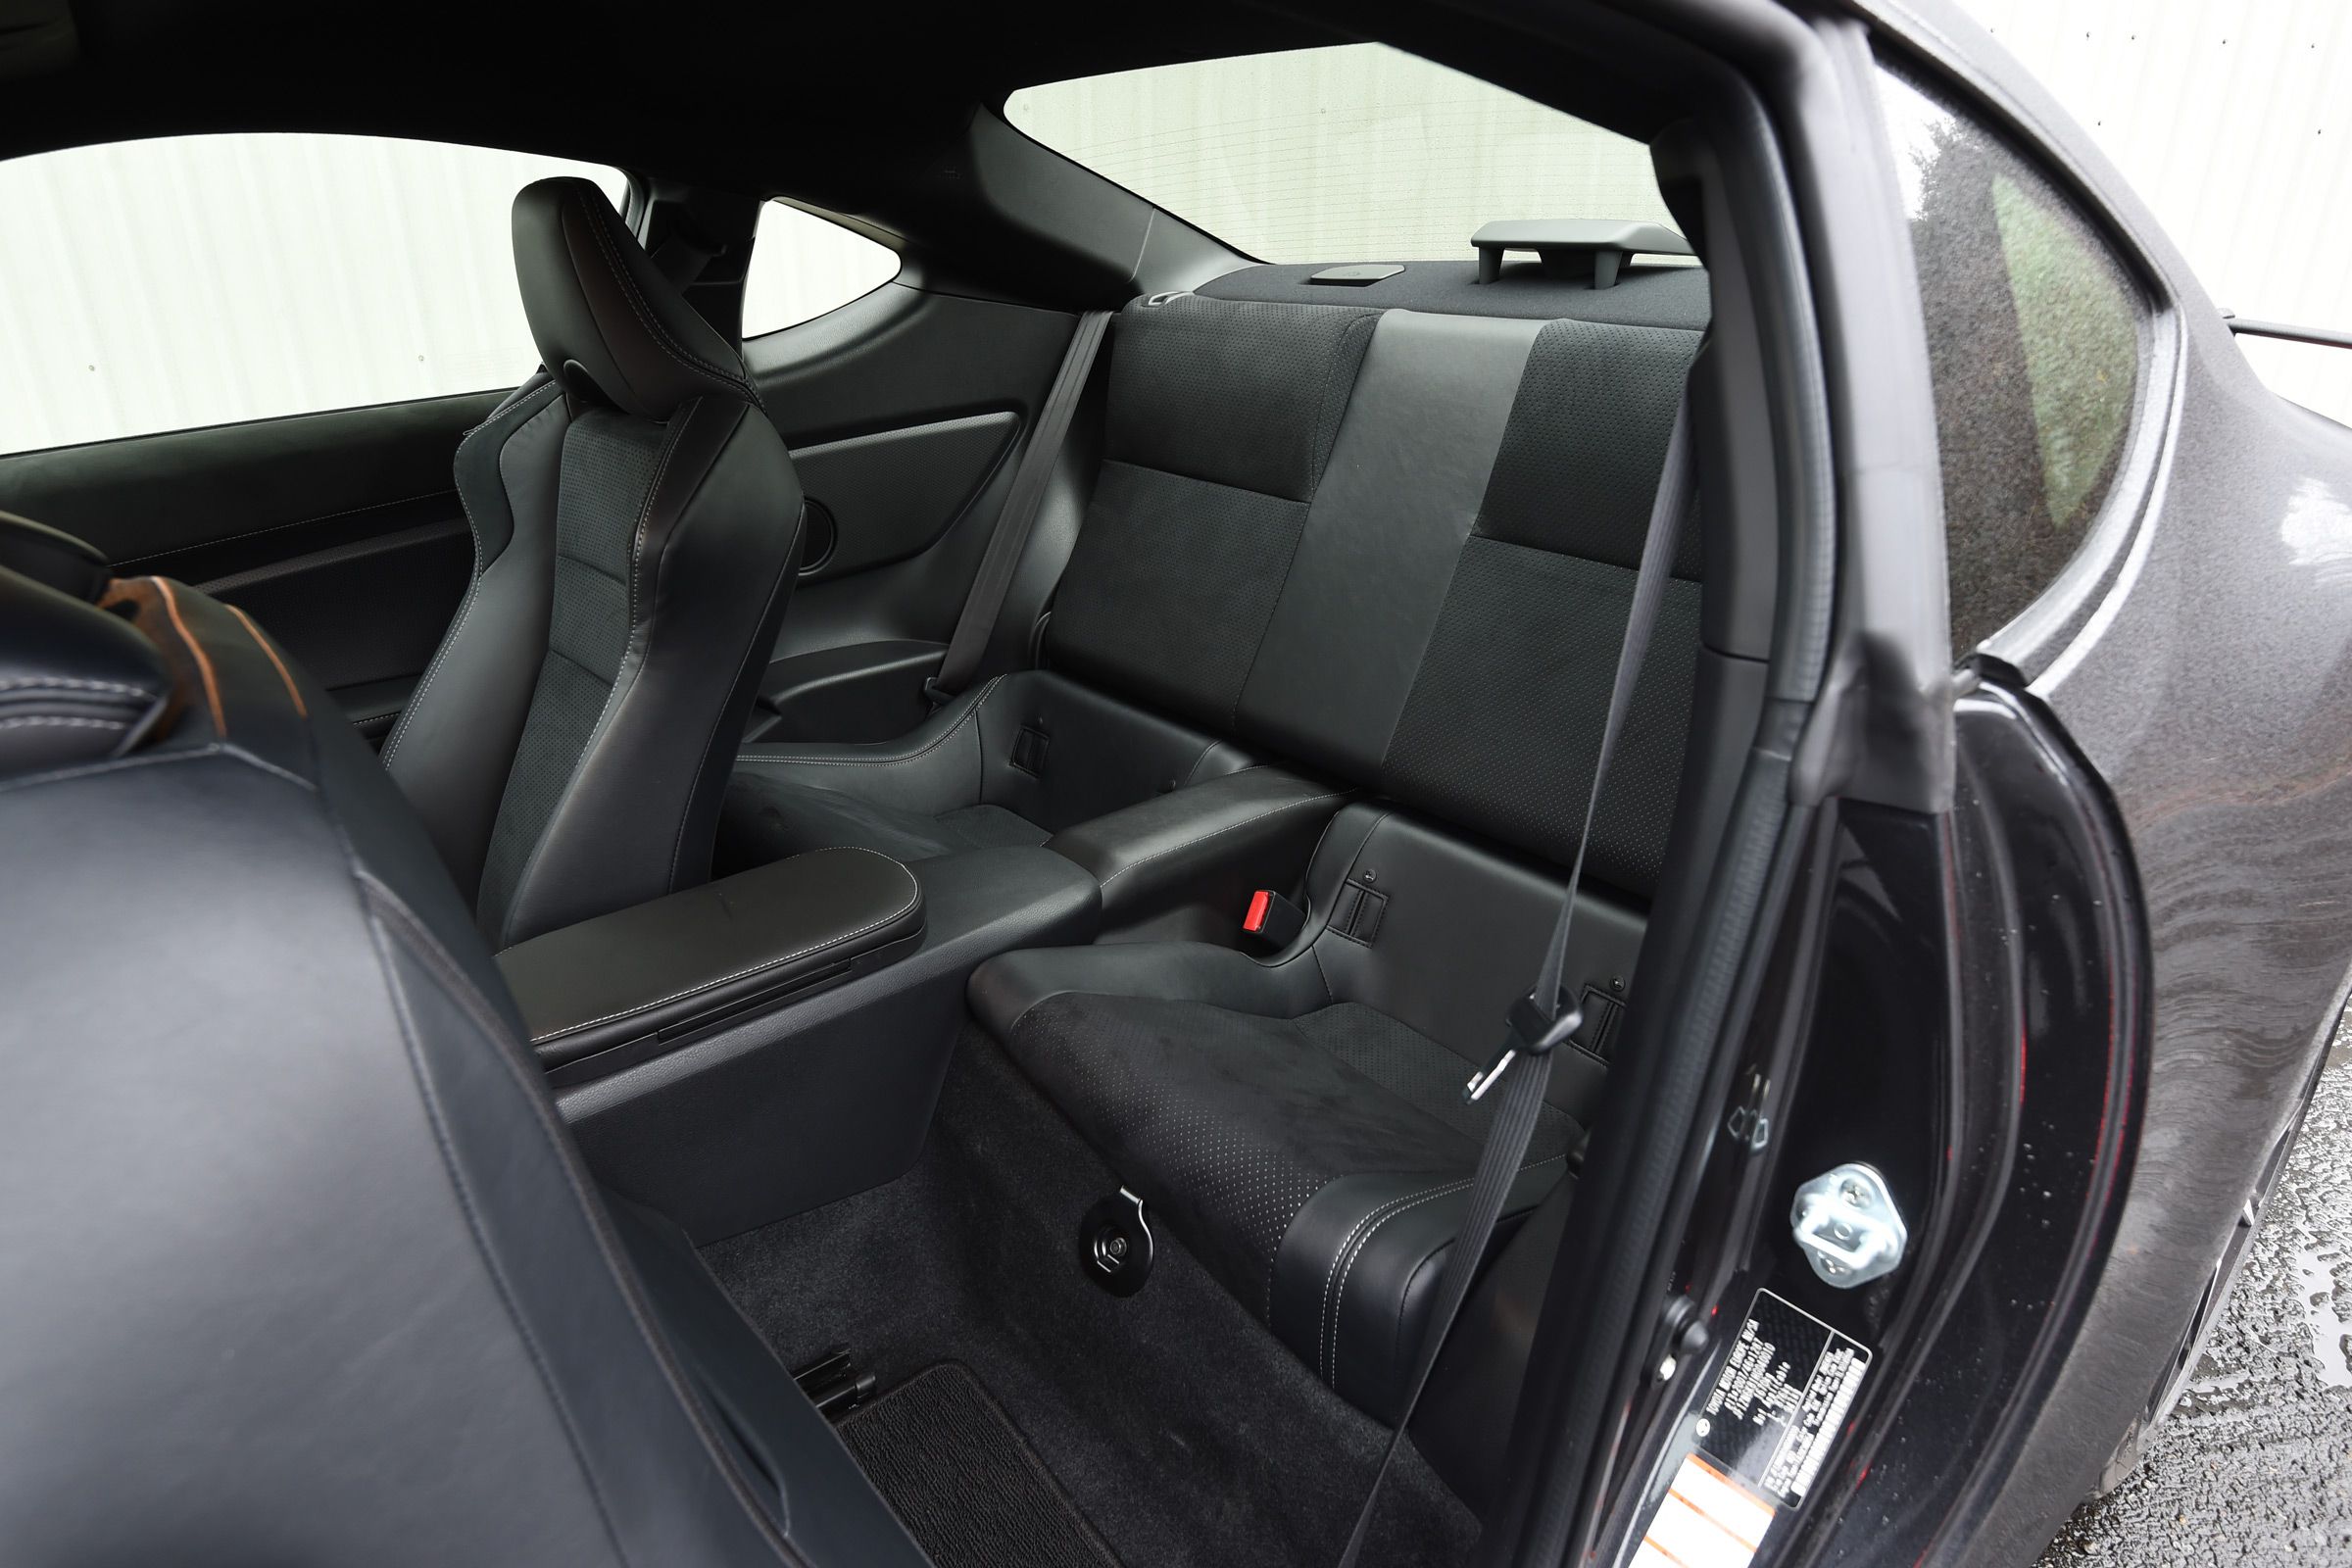 2017 Toyota Gt86 Black Interior Seats Rear (View 8 of 13)